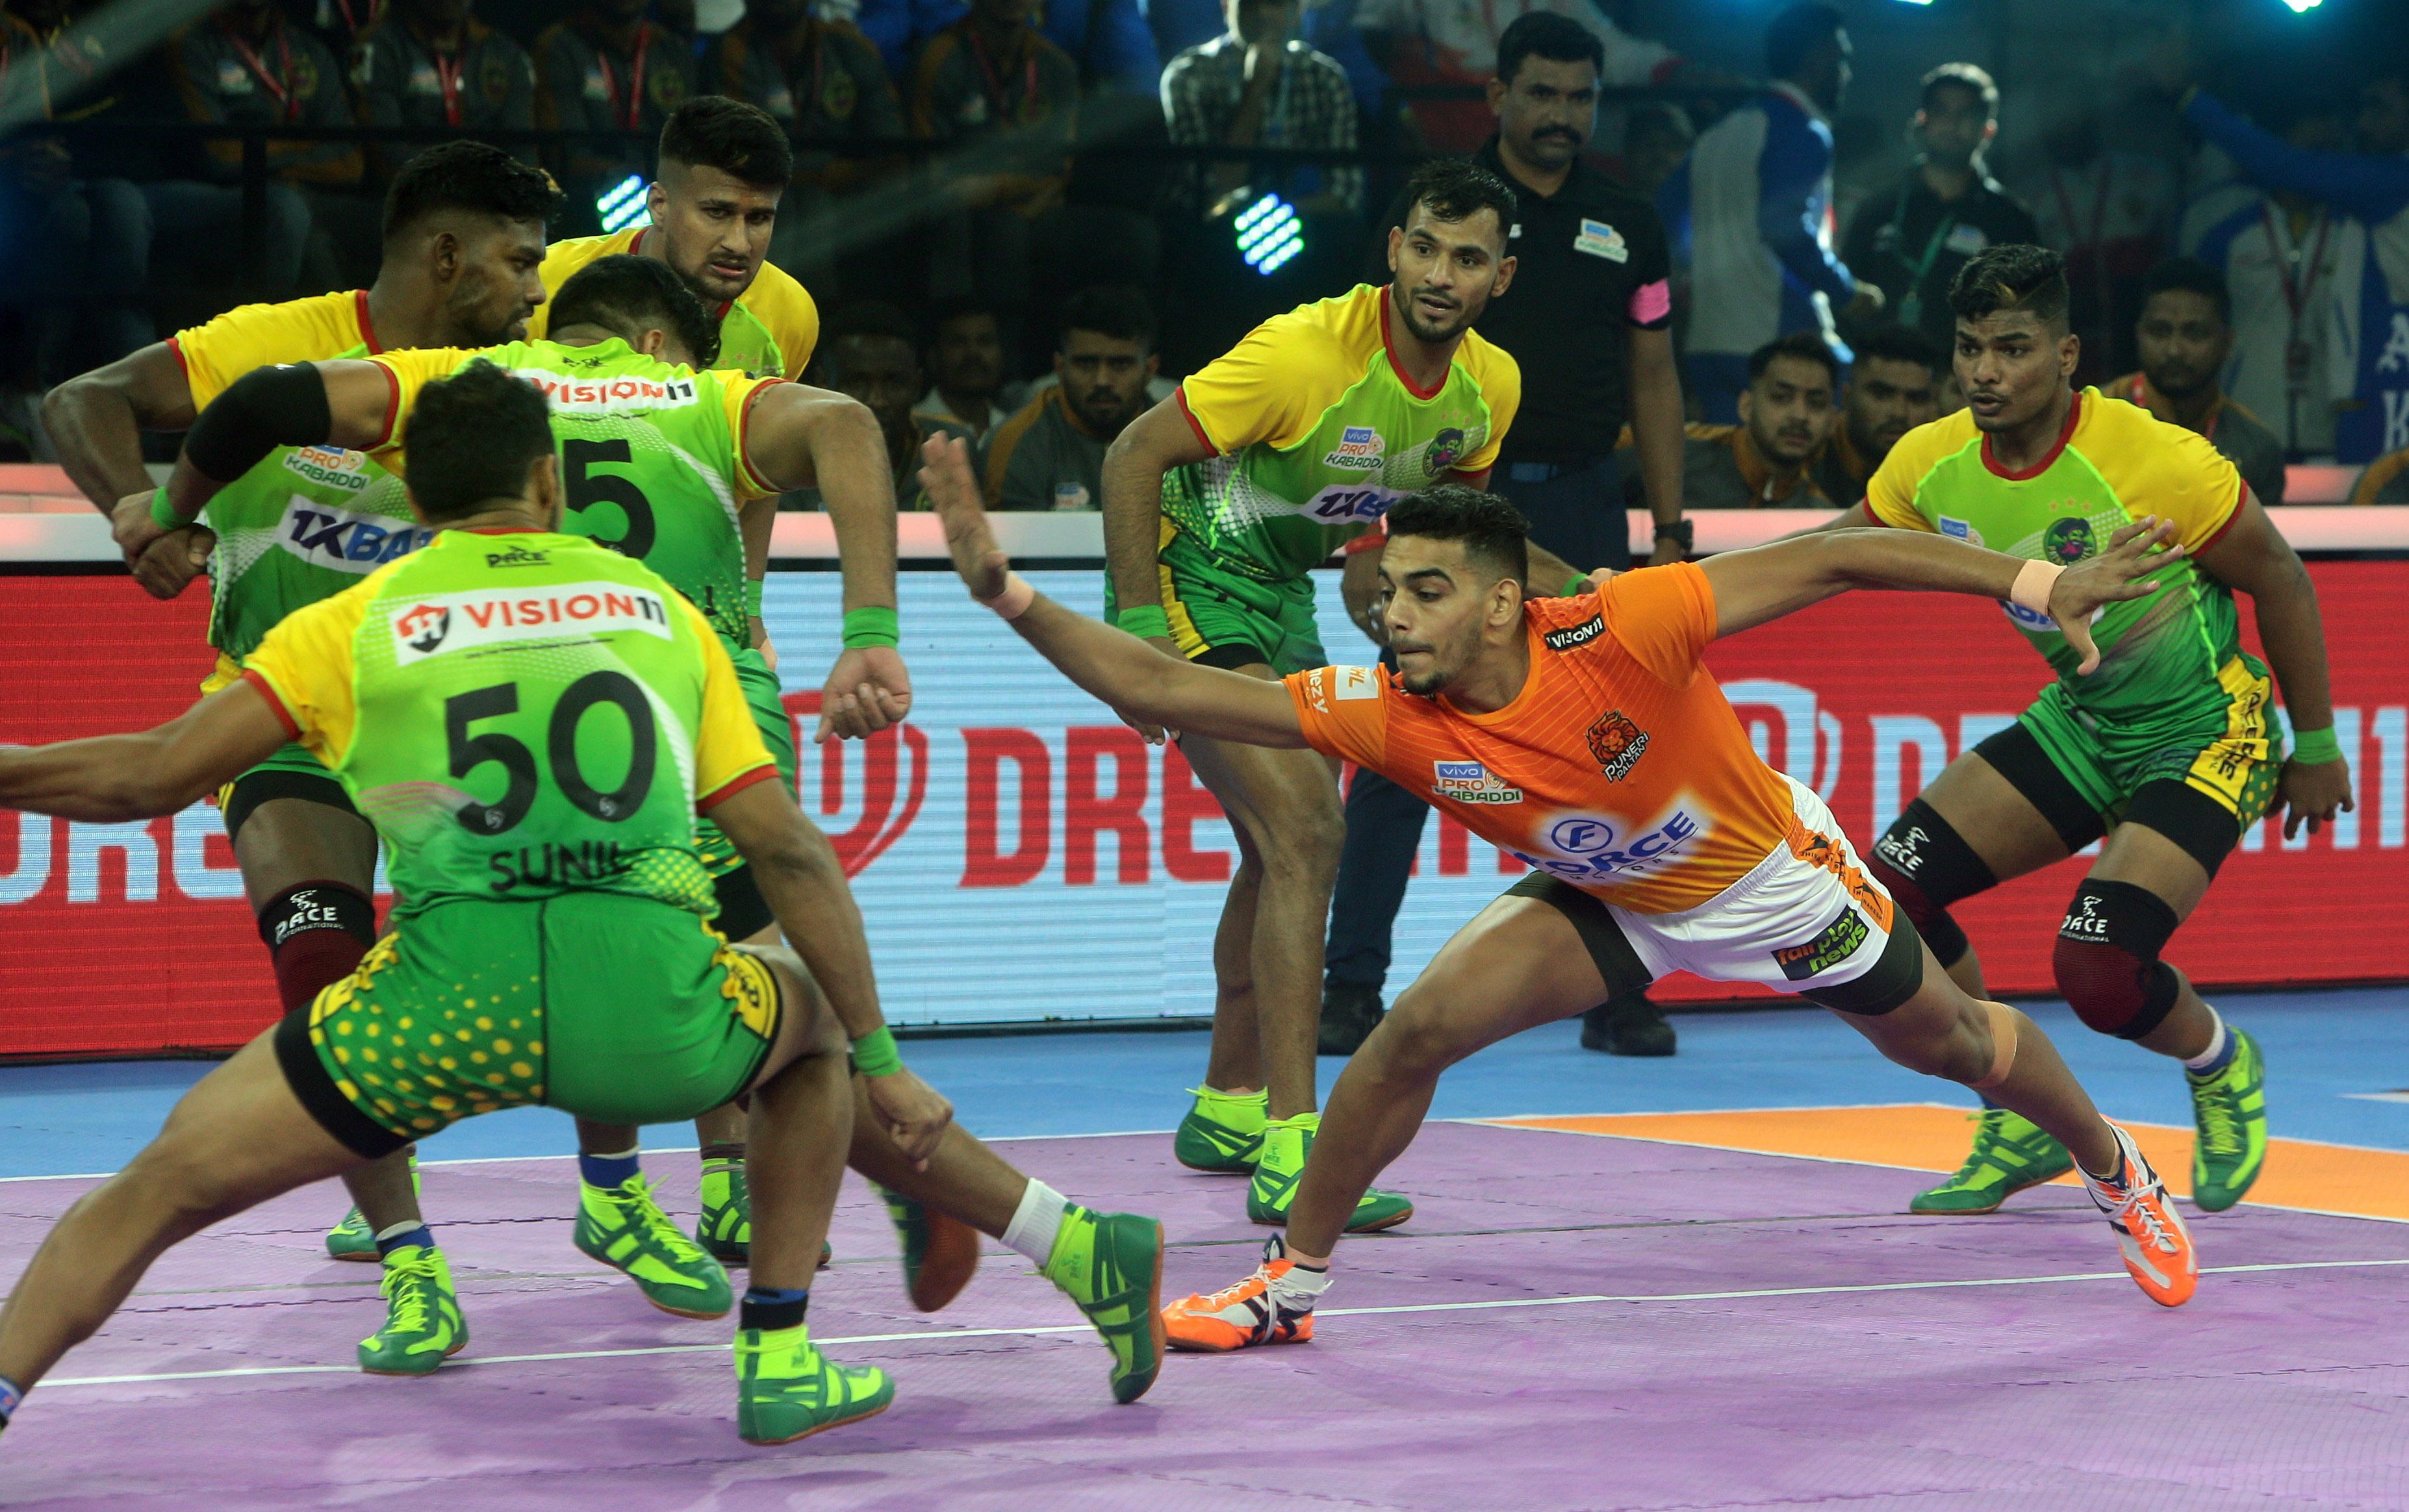 PKL 2022 LIVE: Winless Tamil Thalaivas and Patna Patna set up clash on Day 10 while Dabang Delhi aim fifth successive victory as they face Haryana Steelers in Pro Kabaddi League 9 - Follow LIVE updates